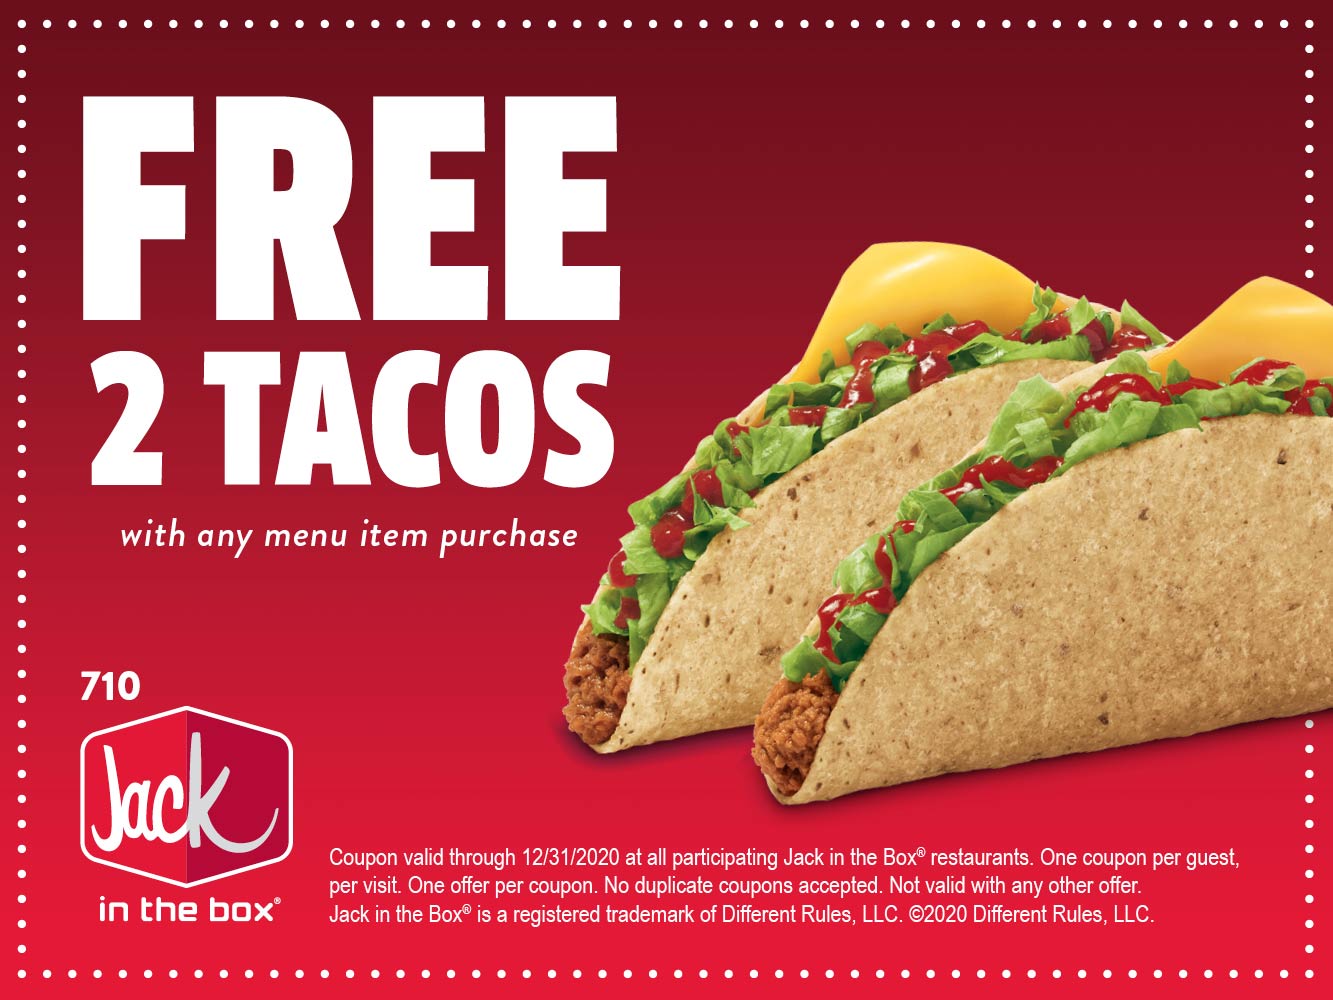 Jack in the Box restaurants Coupon  2 free tacos with any purchase all year at Jack in the Box restaurants #jackinthebox 